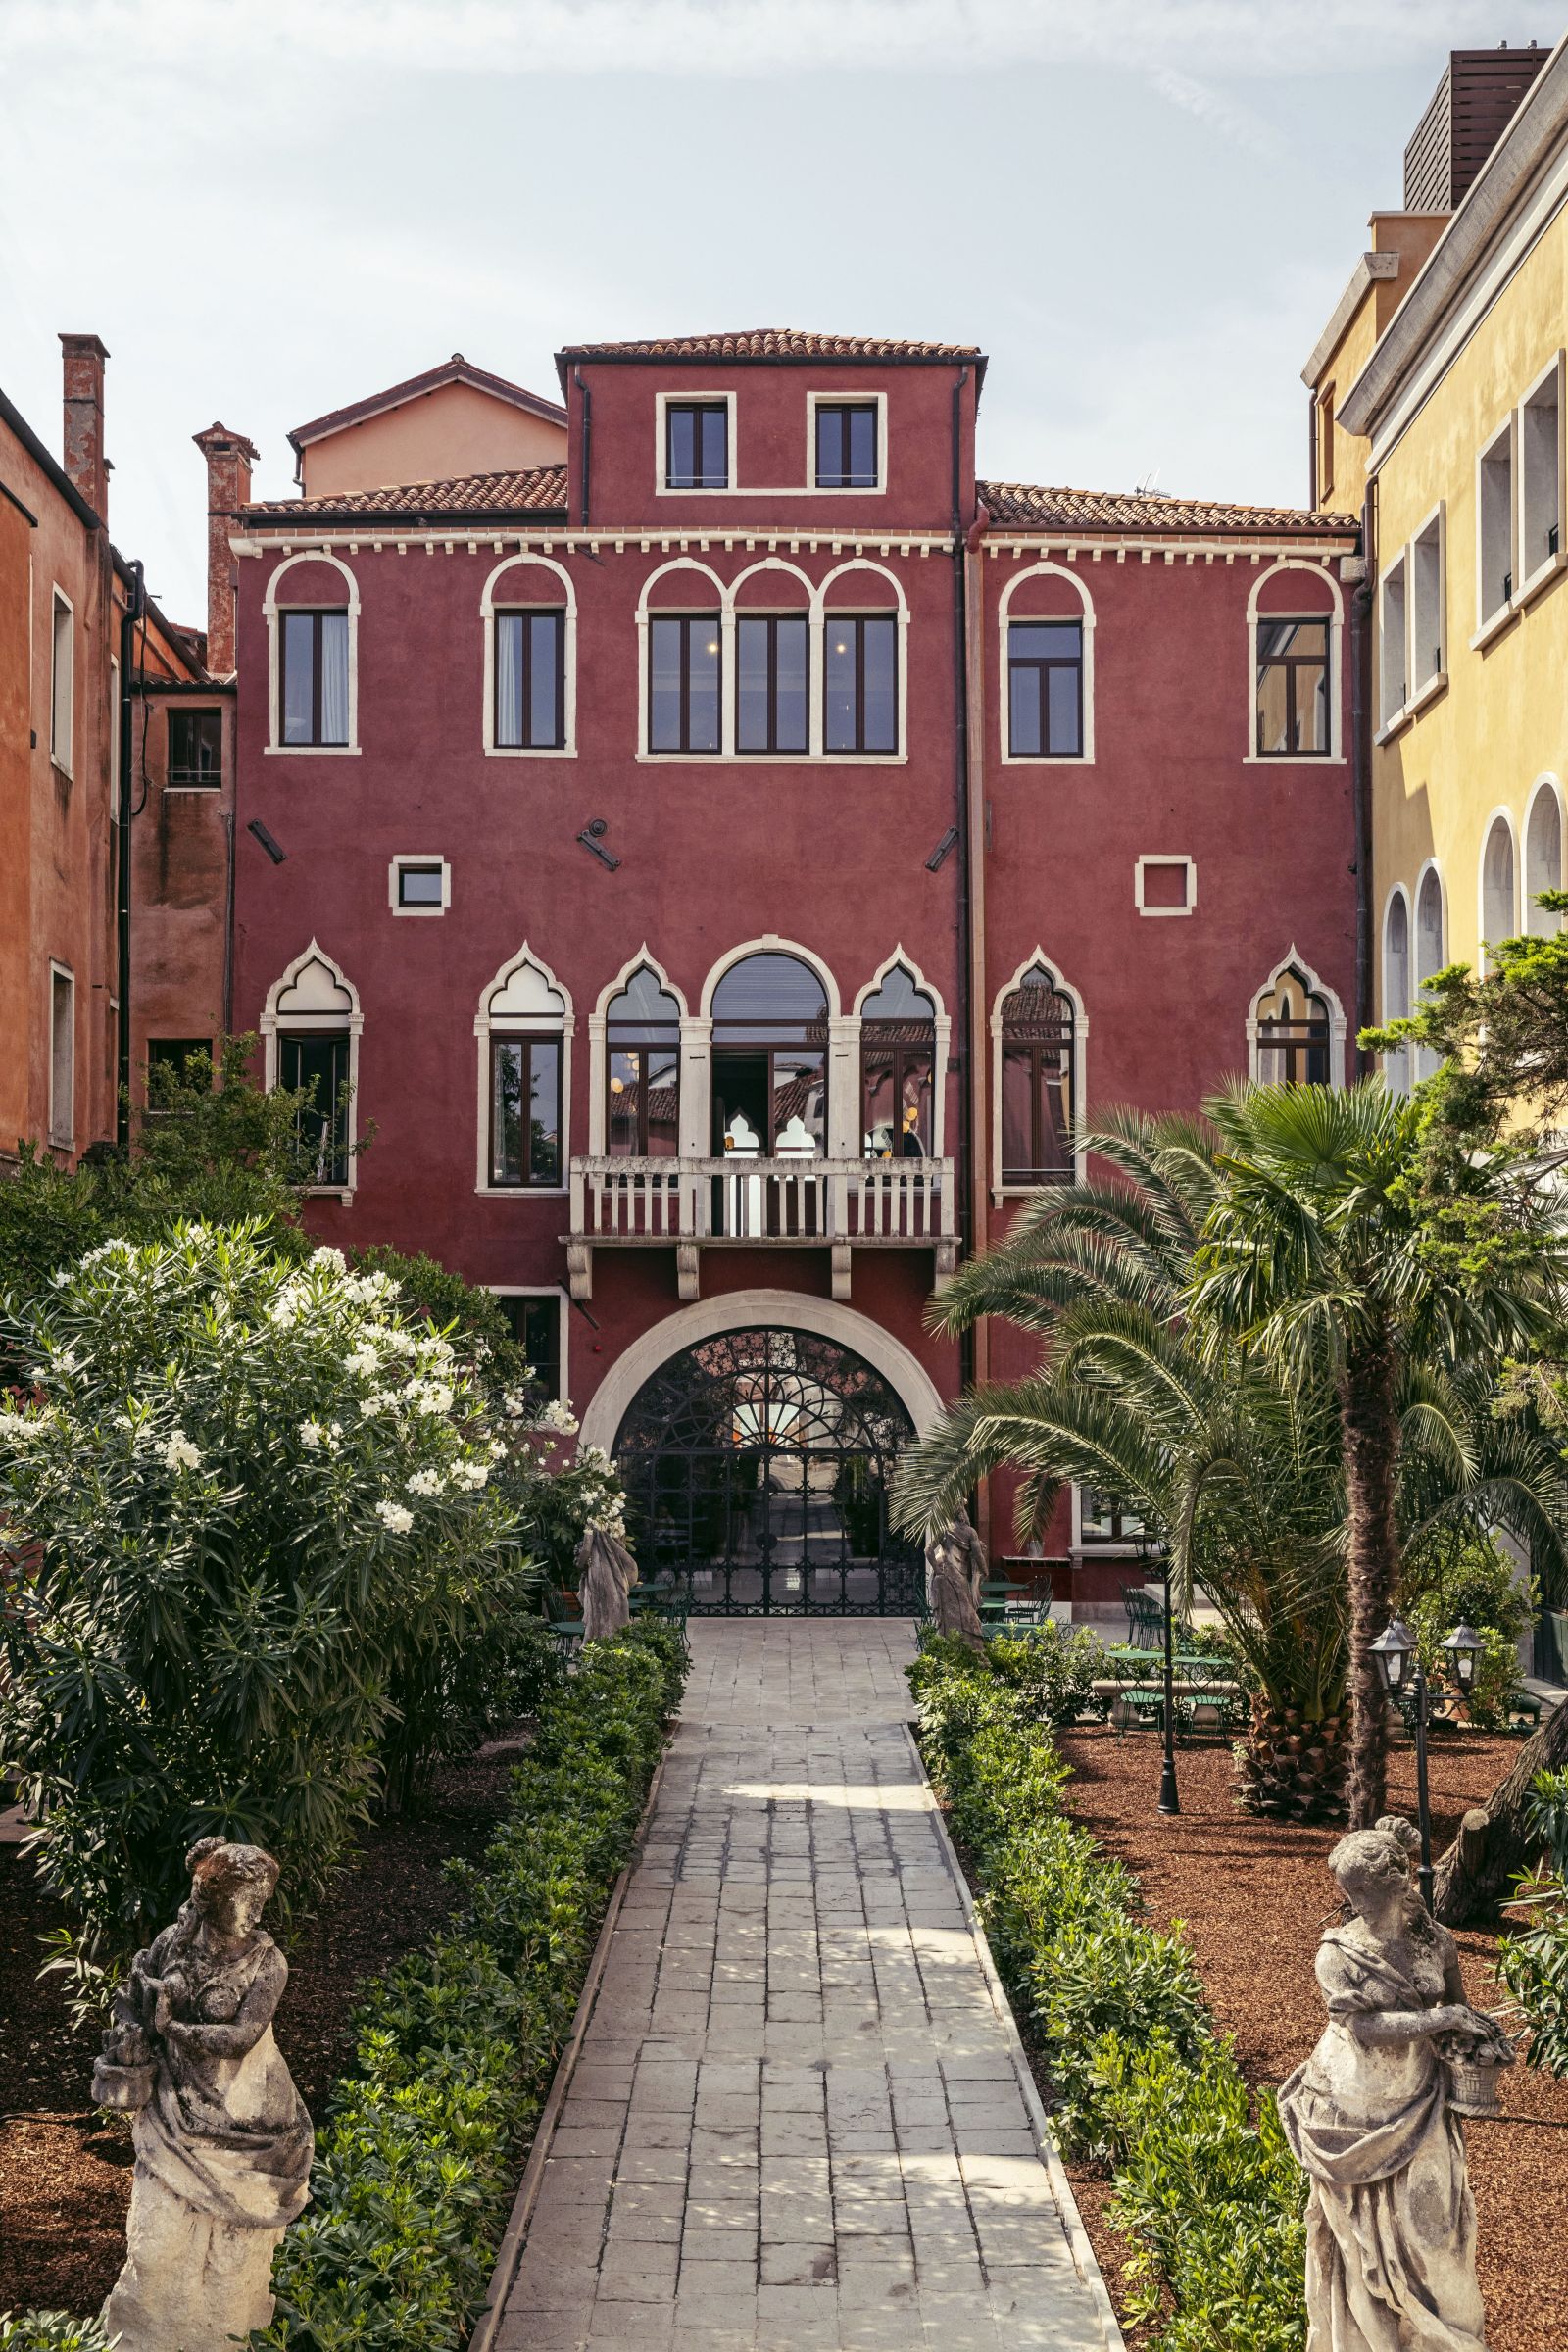 Courtyard and gardens of Il Palazzo Experimental in Venice